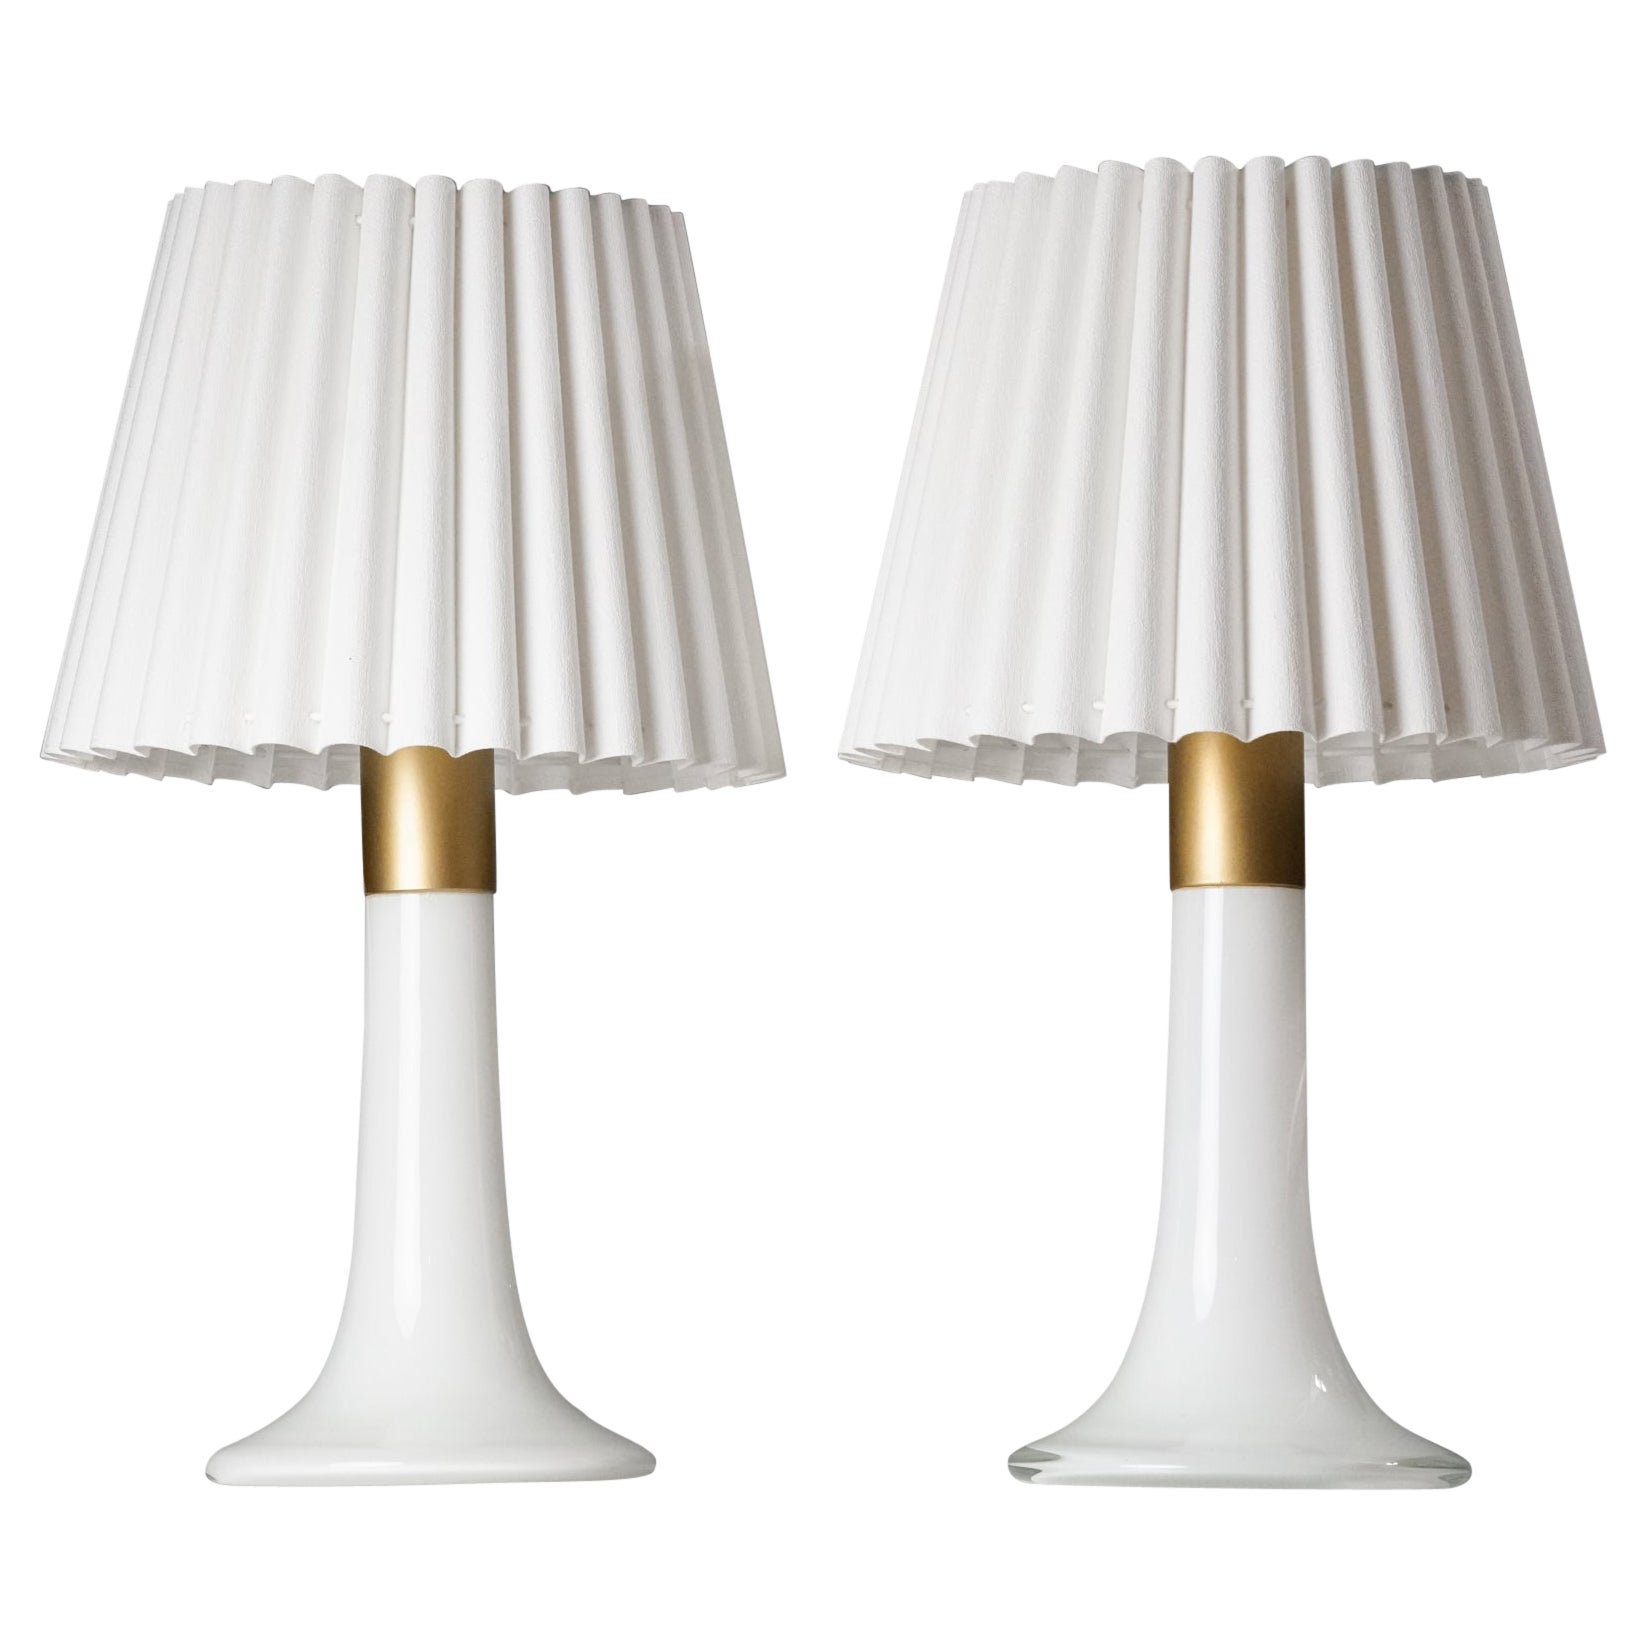 Set of Two Glass Table Lamps, Lisa Johansson-Pape, Orno Oy, 1960s 